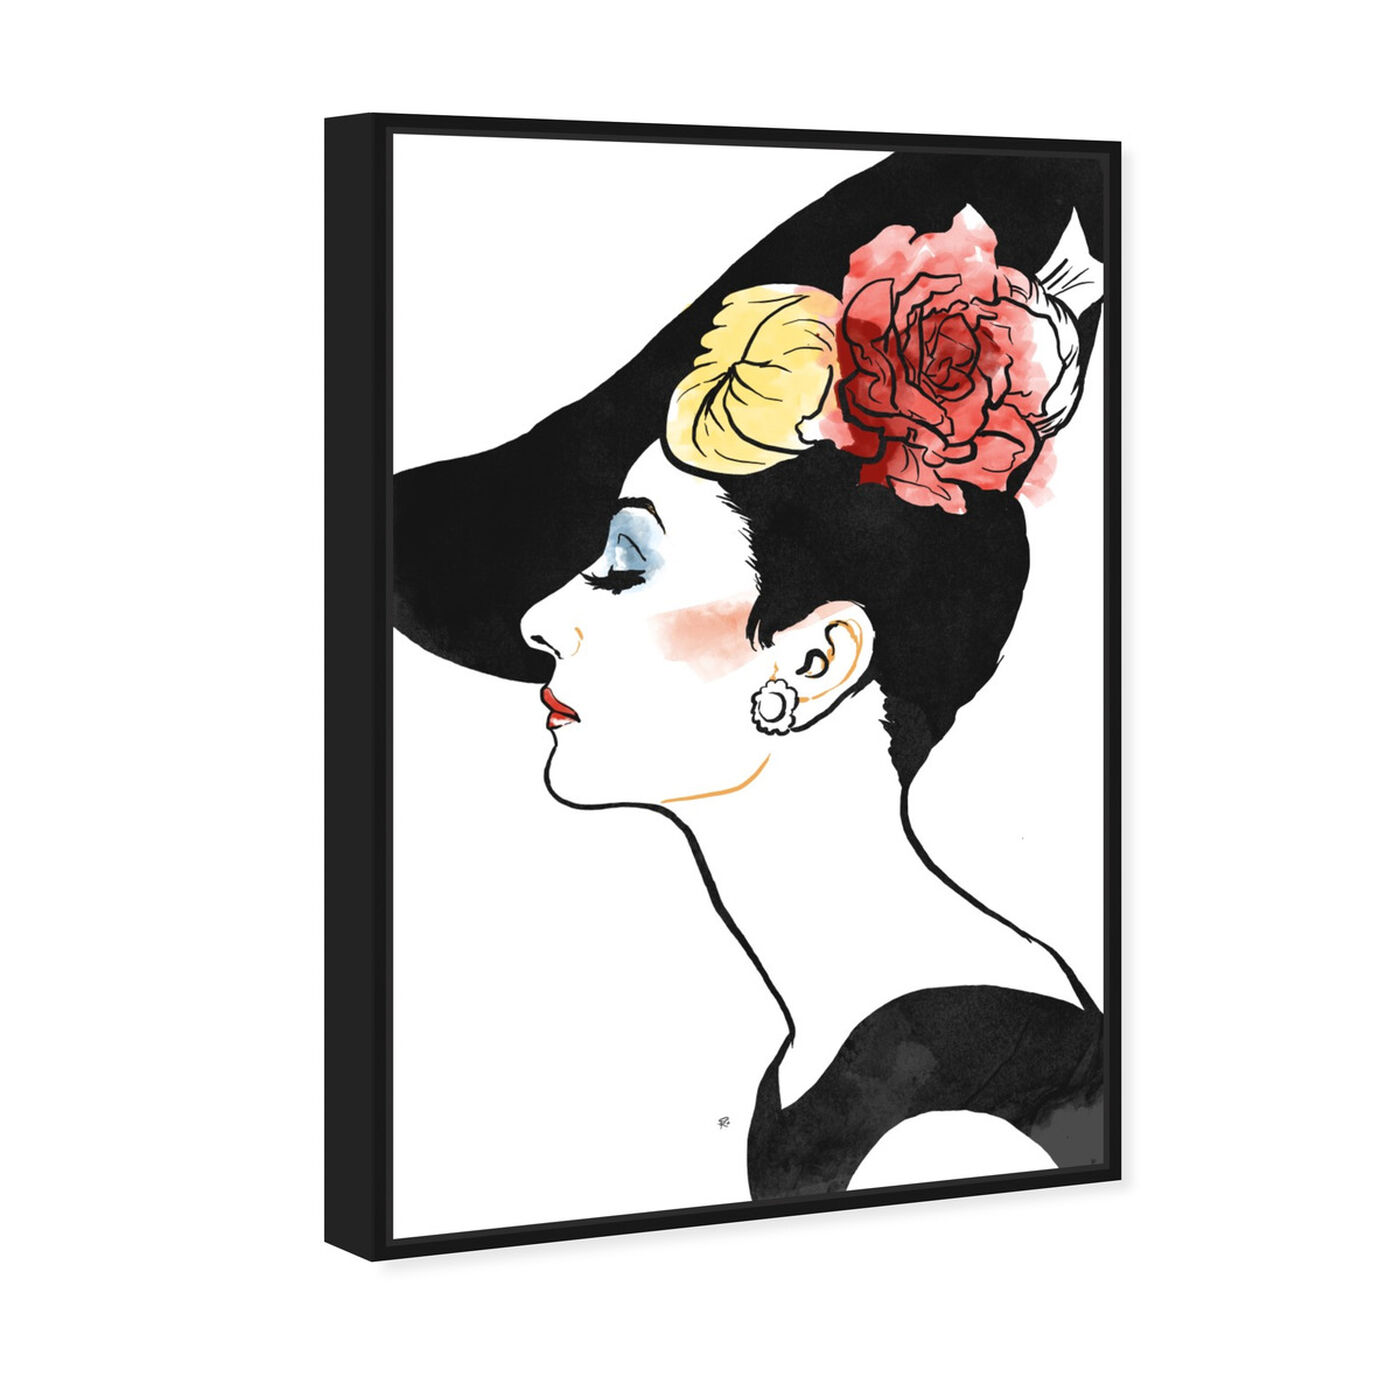 Angled view of Hats and Glam featuring fashion and glam and portraits art.